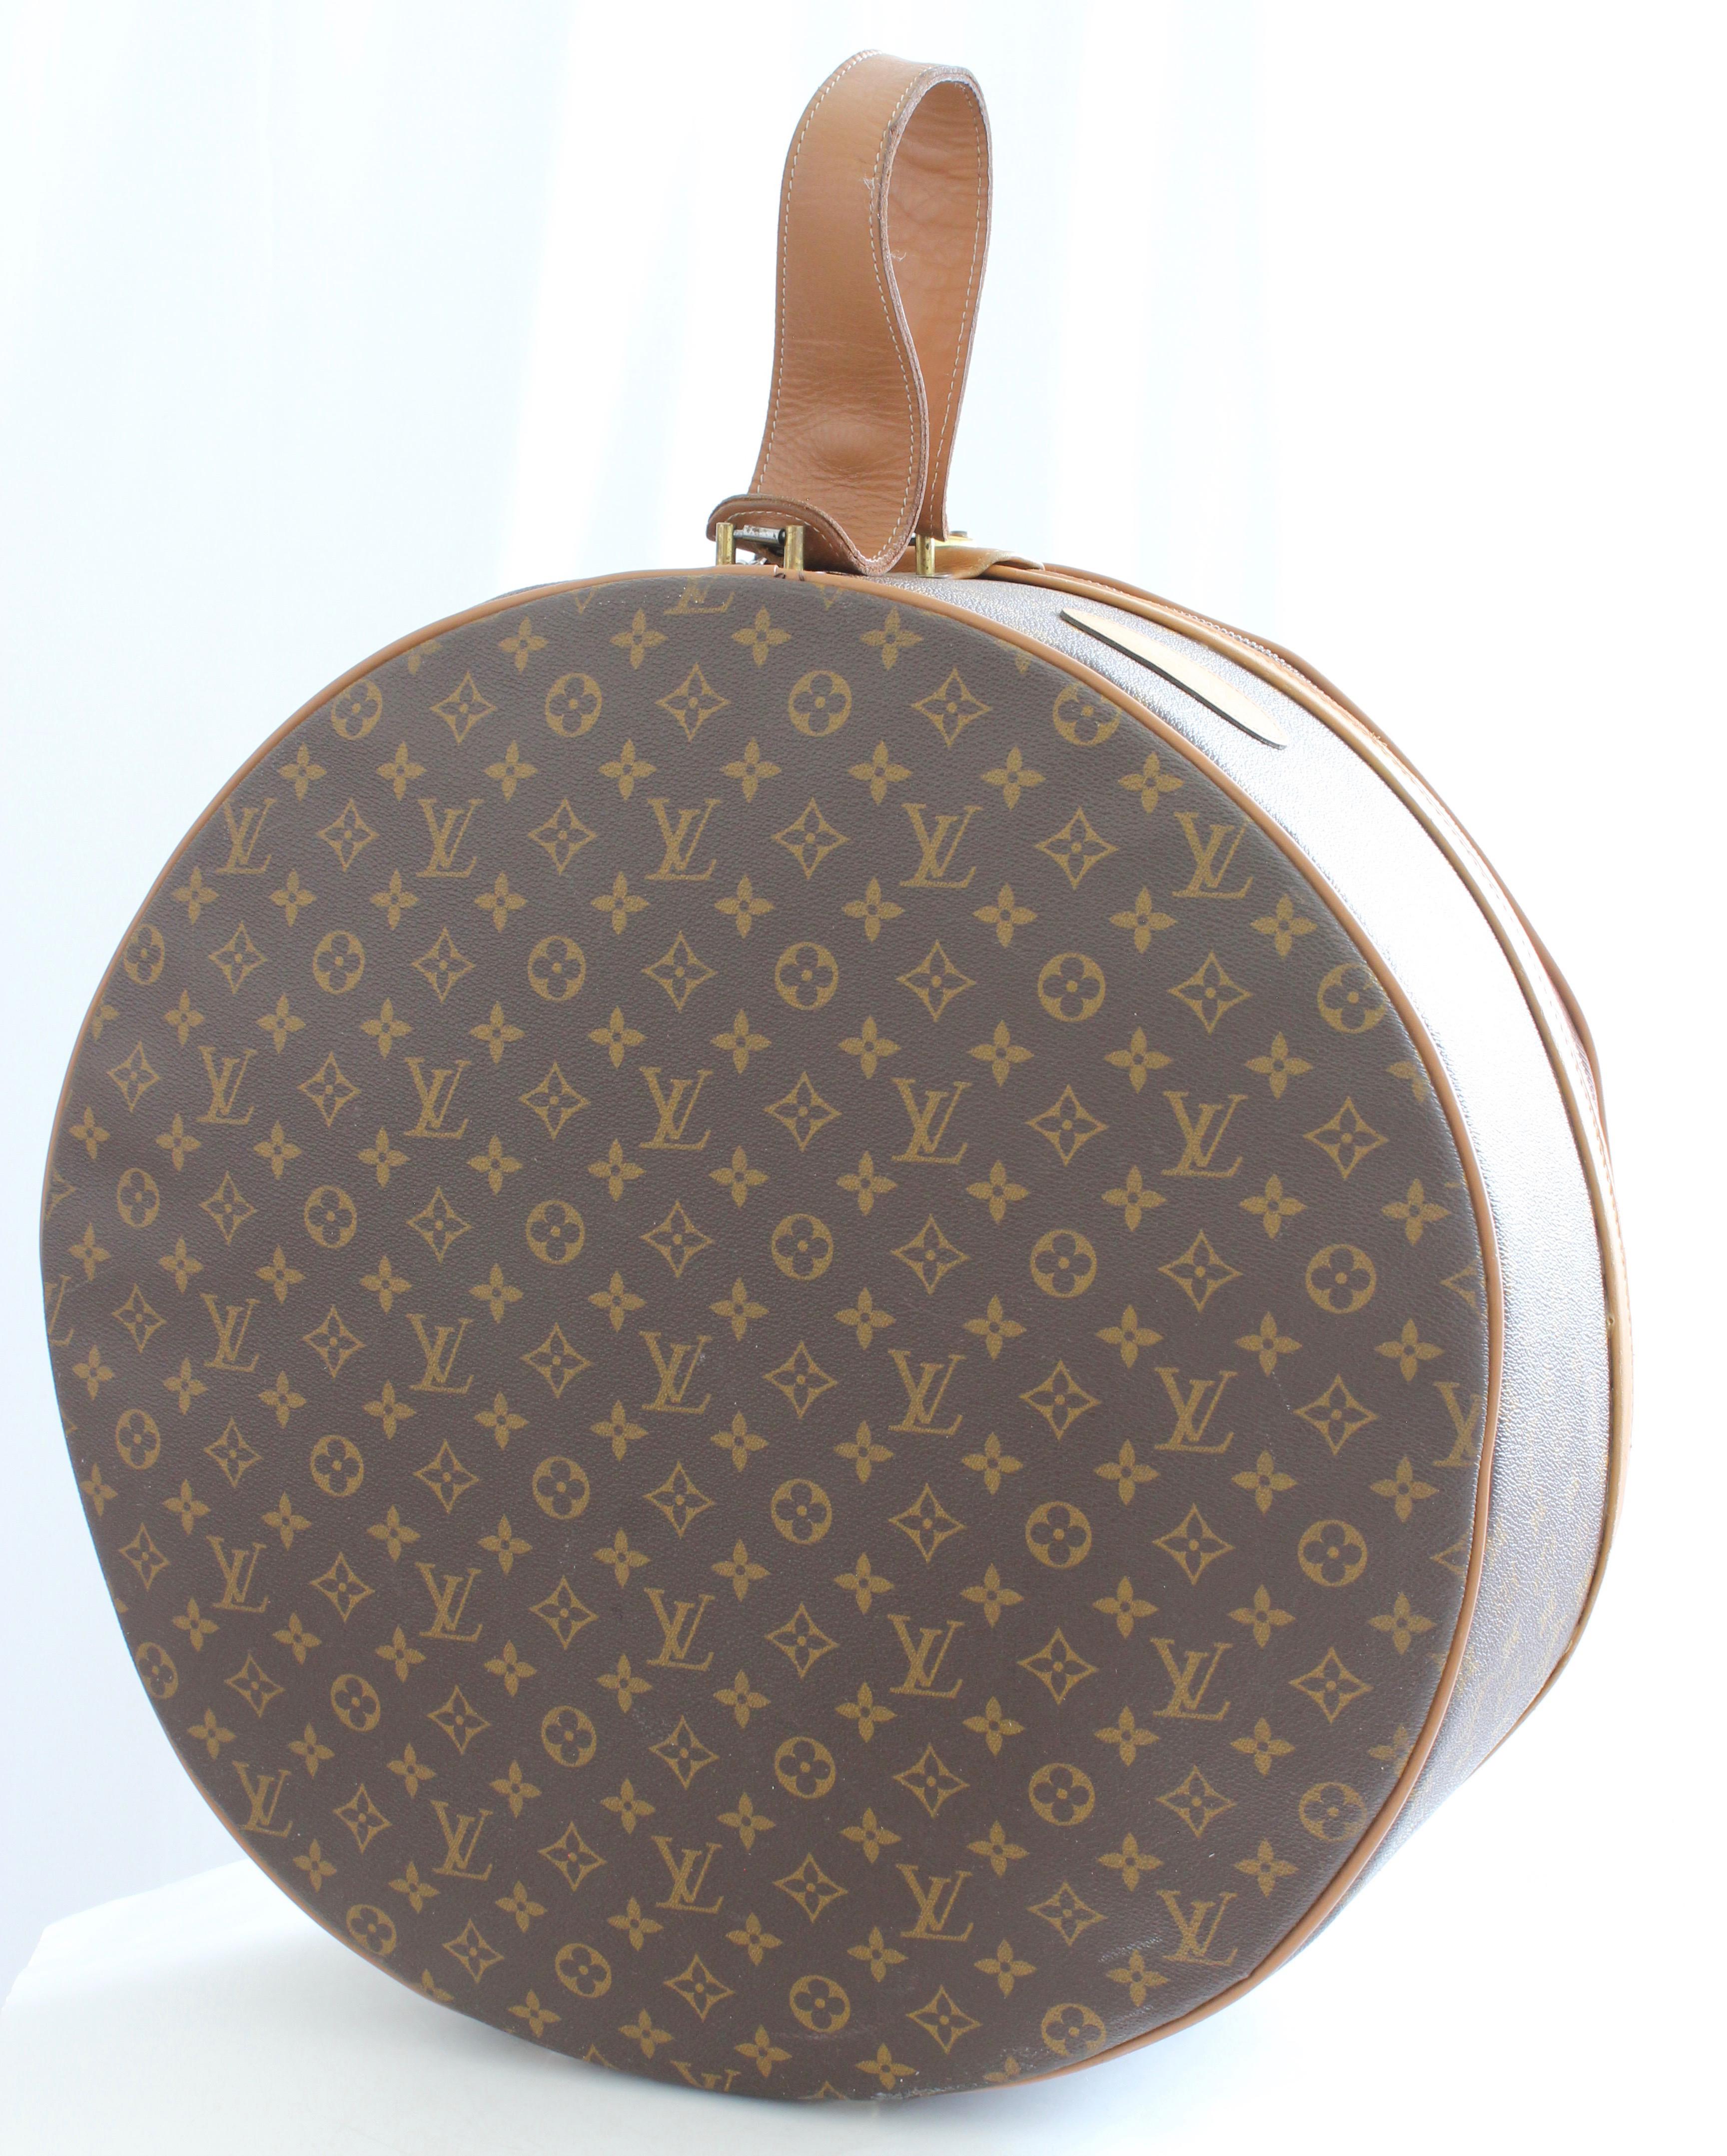 Louis Vuitton The French Company Boite Chapeaux Round Hat Box 50cm Travel Bag  In Good Condition In Port Saint Lucie, FL